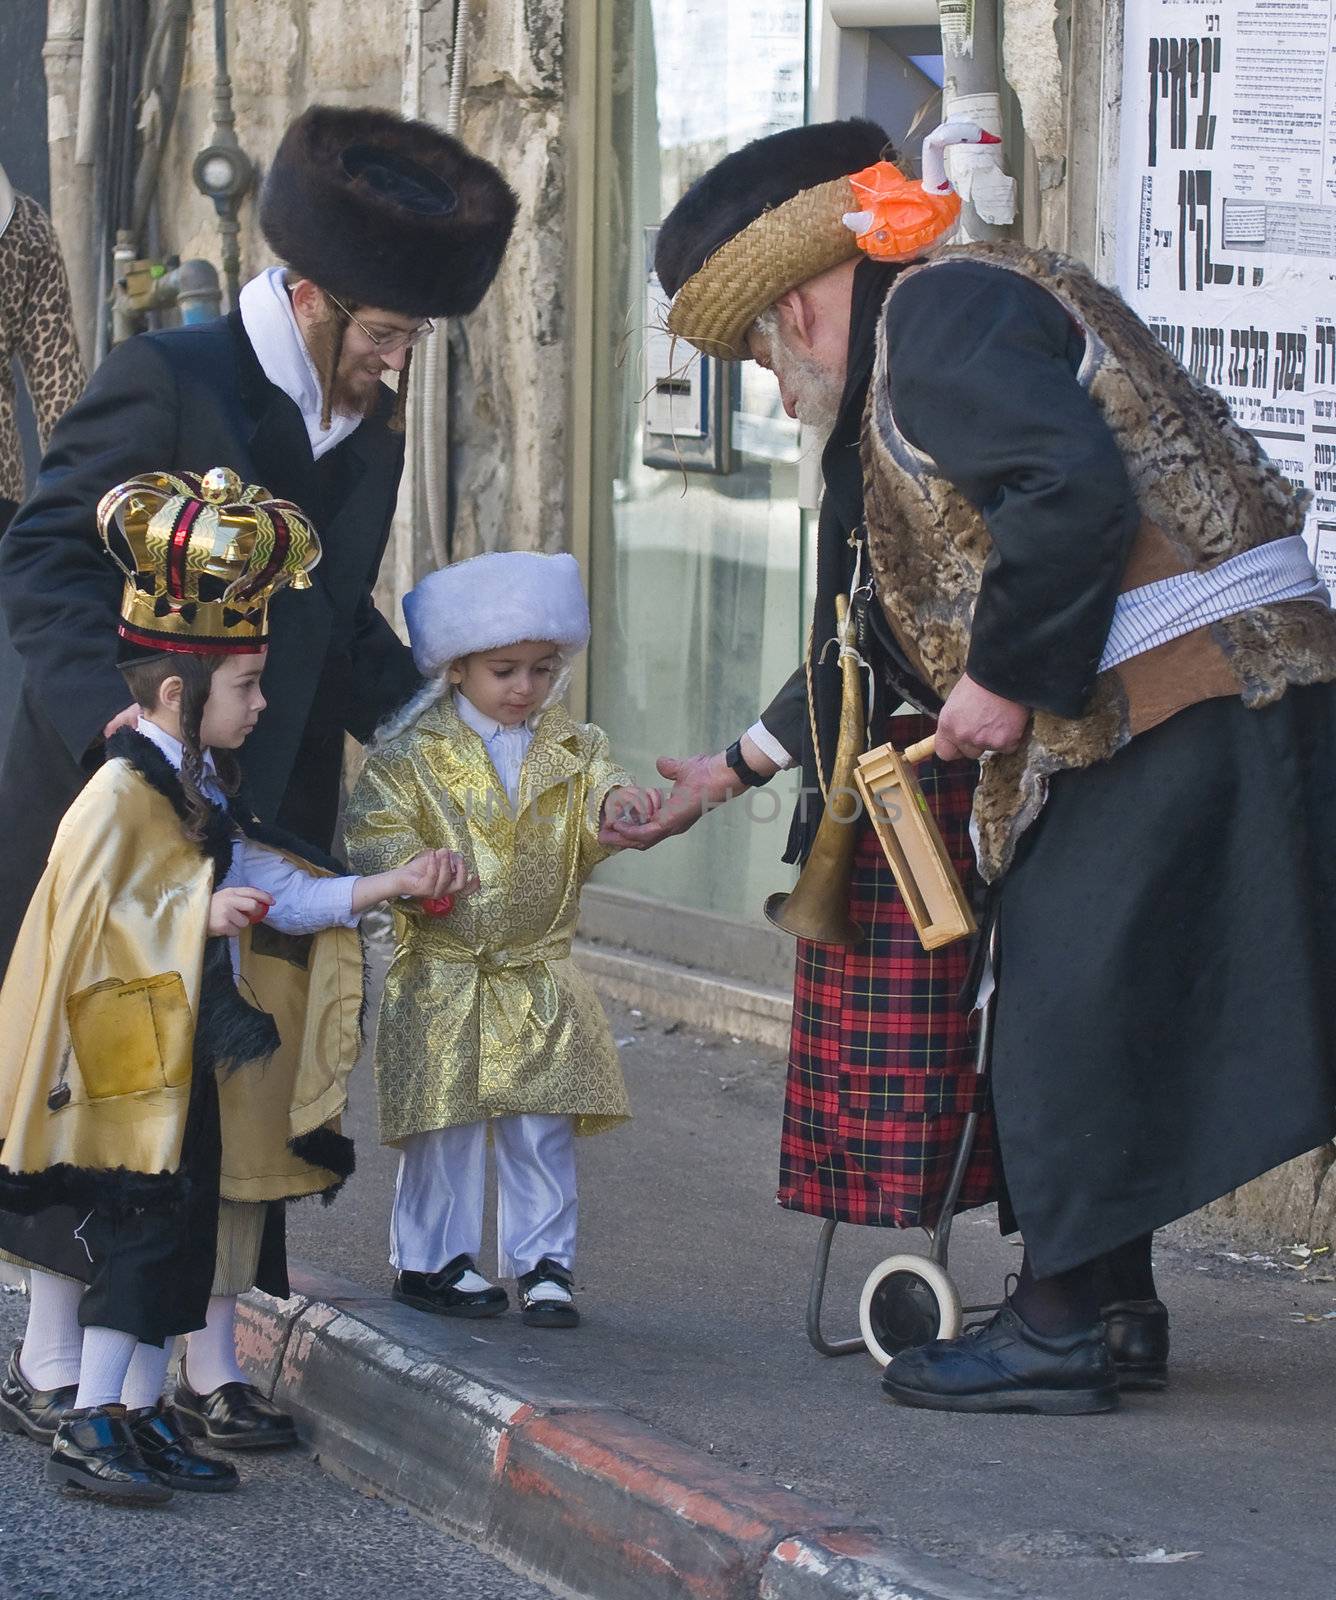 JERUSALEM - MARS 09 : Ultra Orthodox man give presents to a children during Purim in Mea Shearim Jerusalem on Mars 09 2012 , Giving presents to children is a tradition of Purim